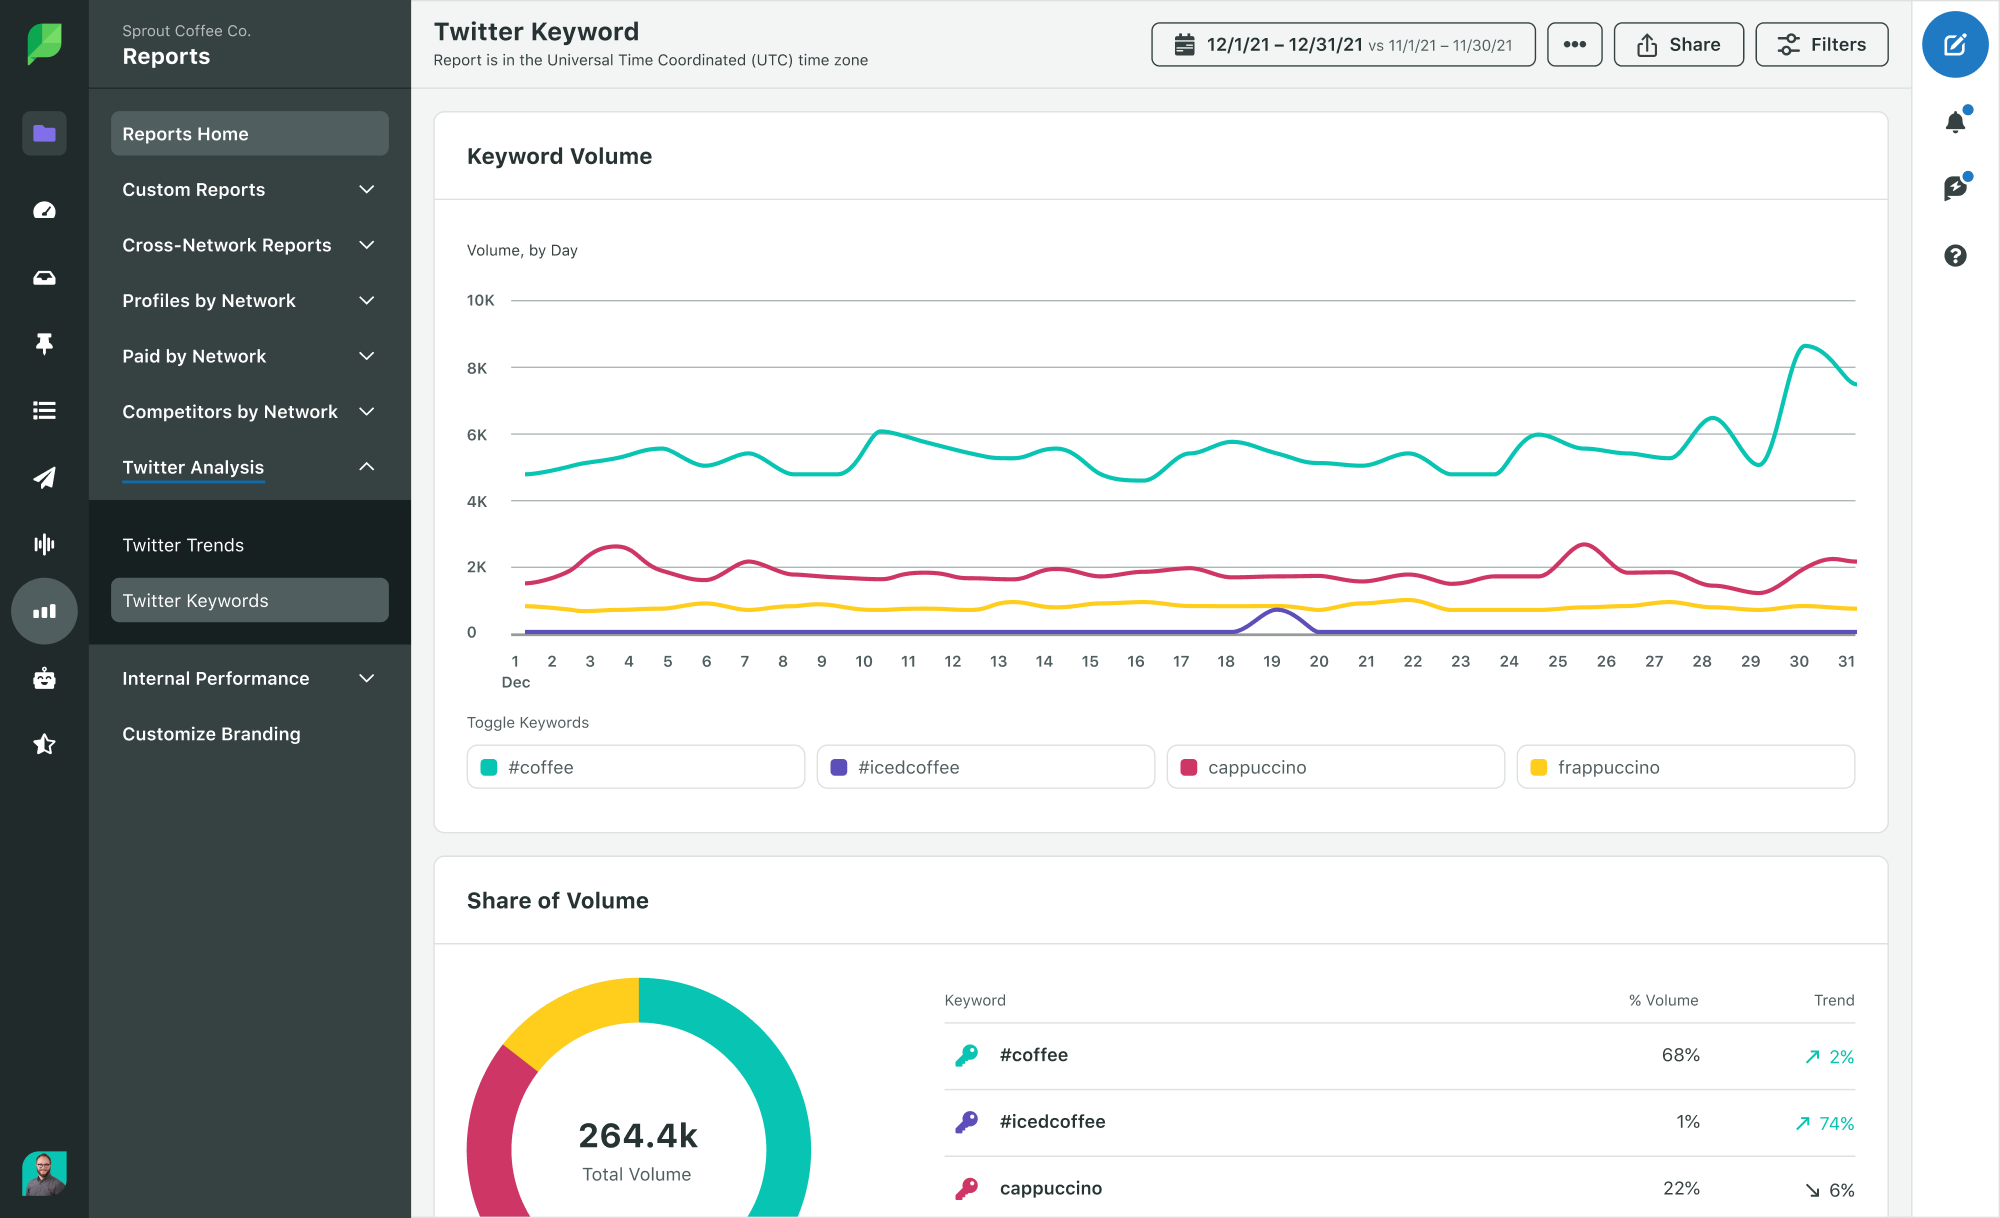 Sprout Social Product Image of Analytics Twitter Keyword Report